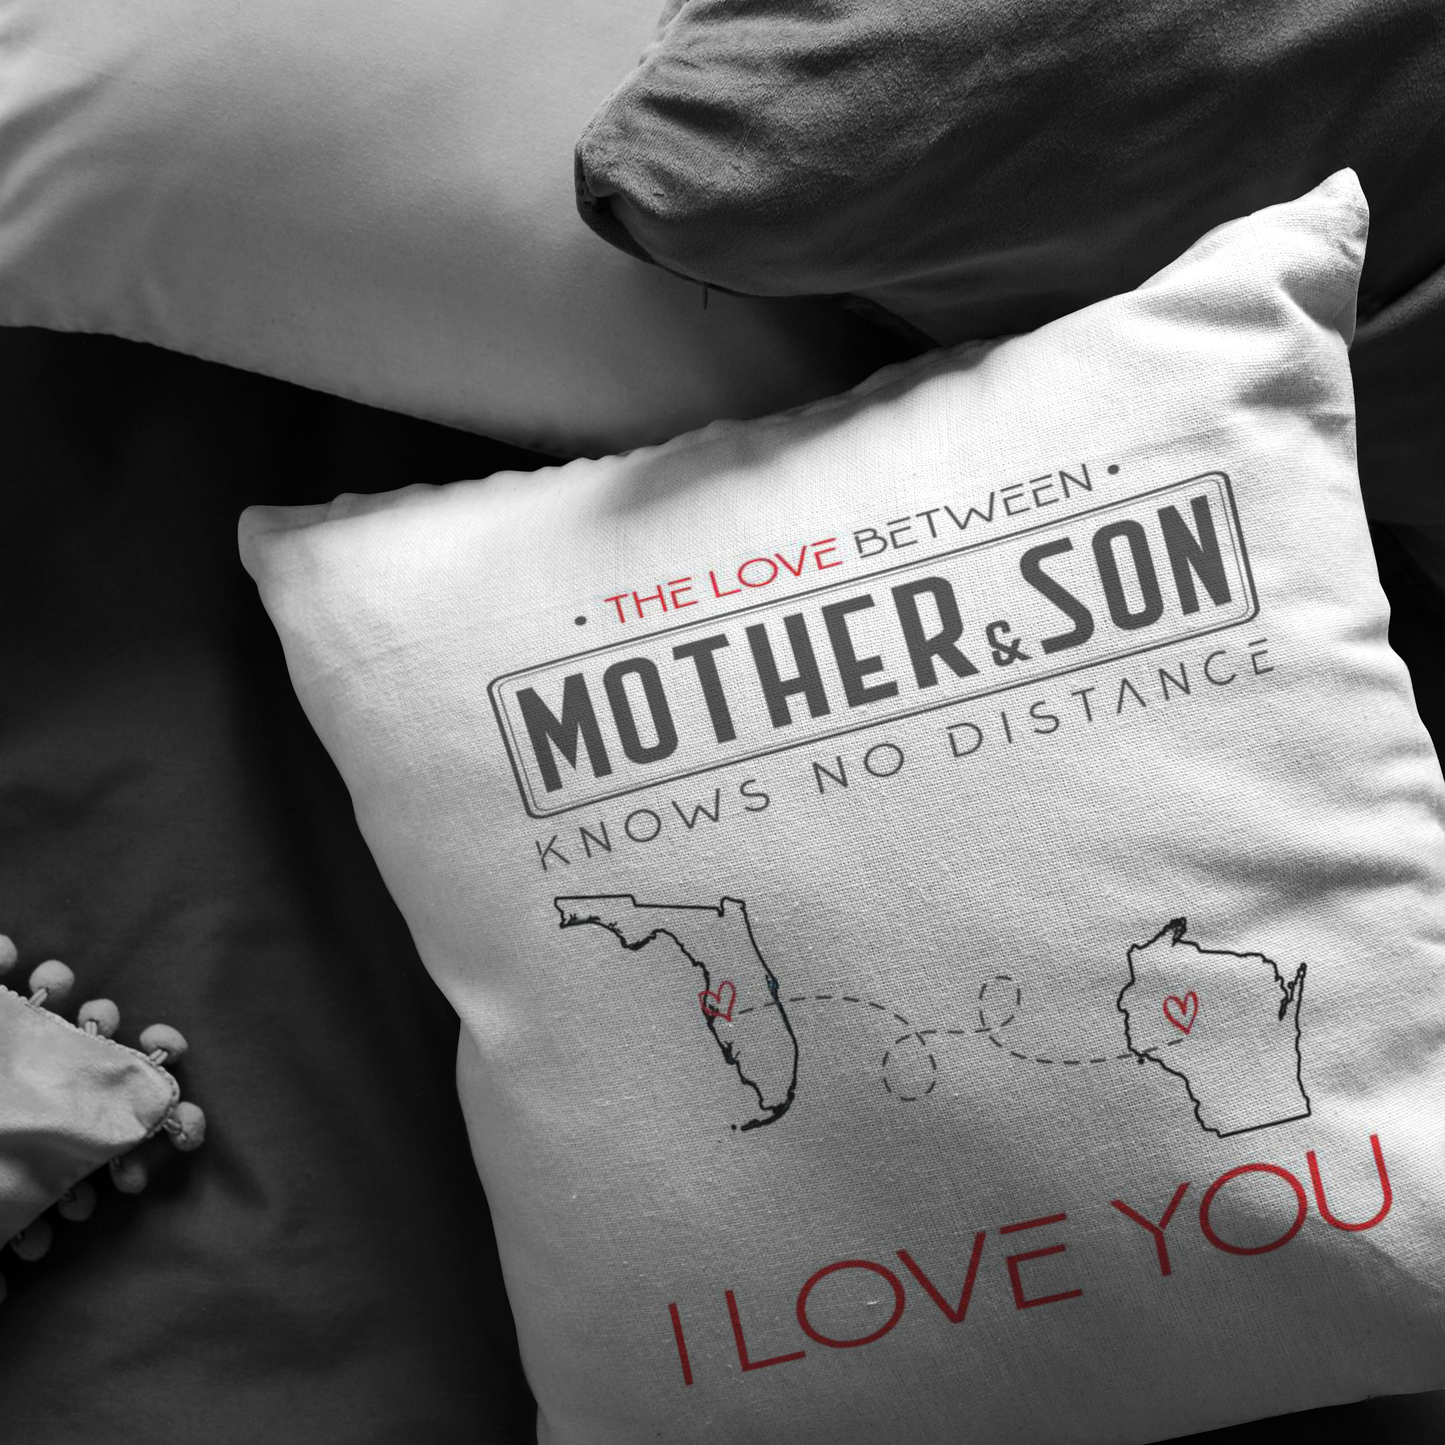 ND-pl20419721-sp-23452 - Mothers Day Gifts From Son - The Love Between Mother  Son